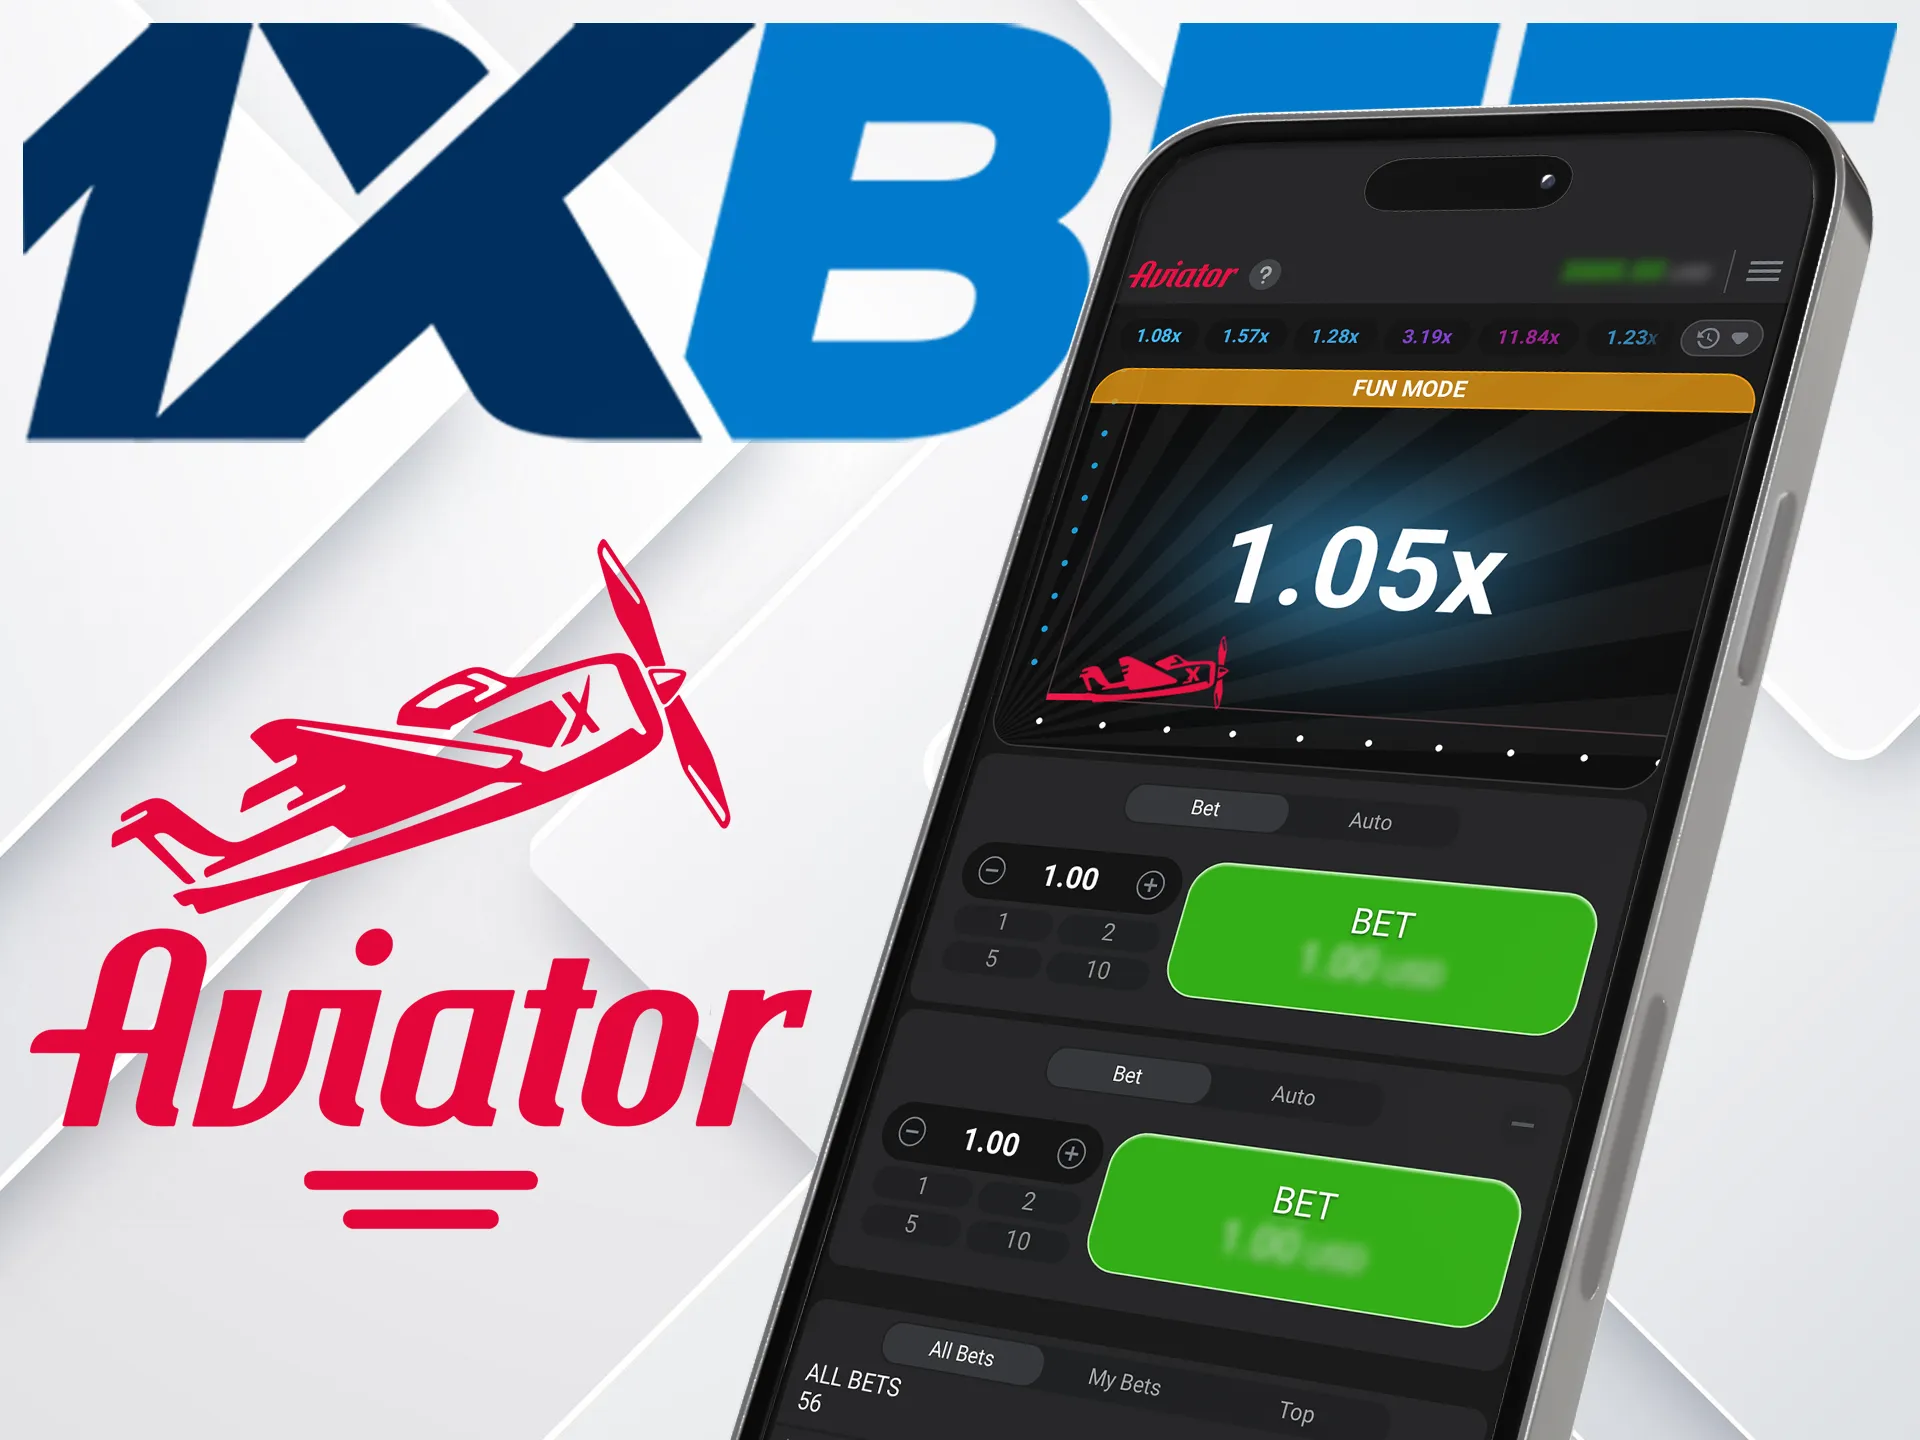 Aviator game is available on 1xbet mobile site, you can start playing immediately after authorization.